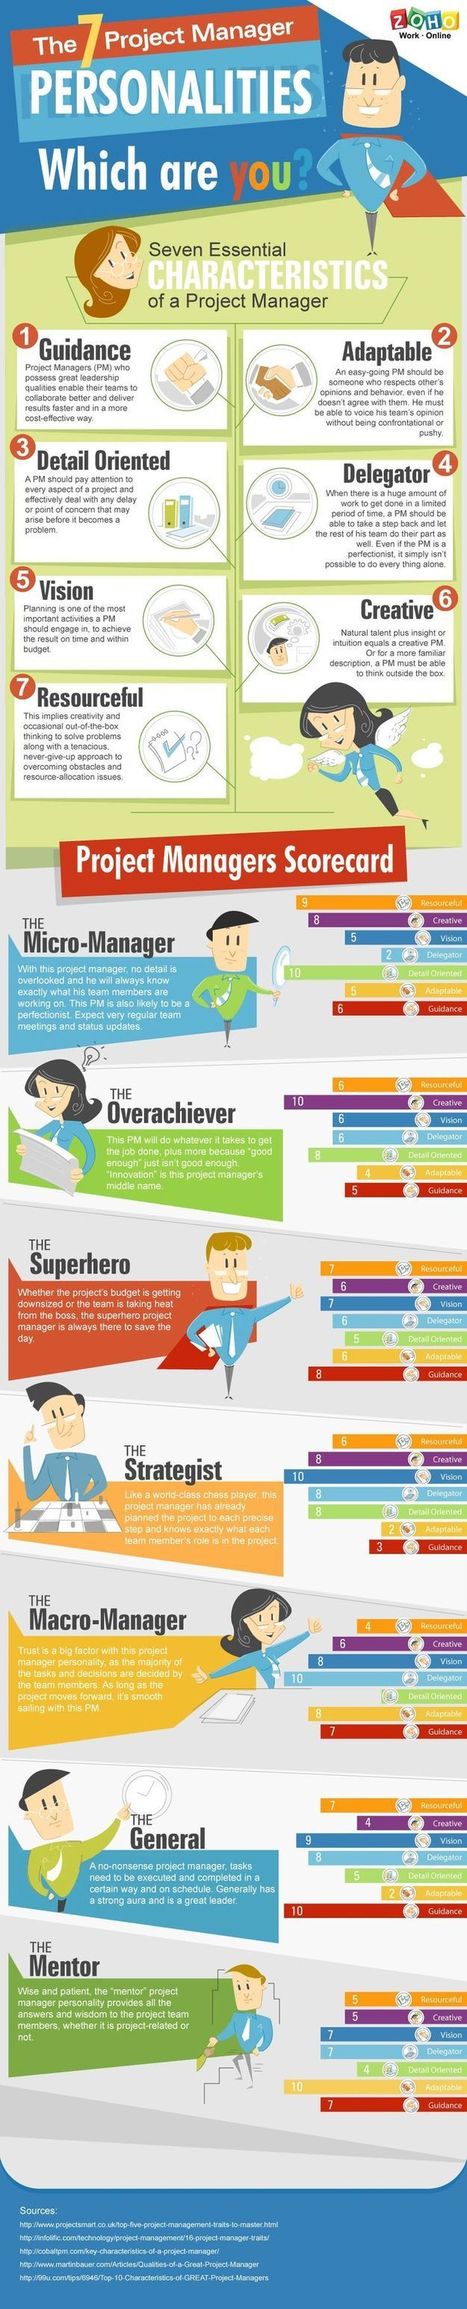 7 Project Manager Personalities-Which Are YOU? [Infographic] | Web 2.0 for juandoming | Scoop.it